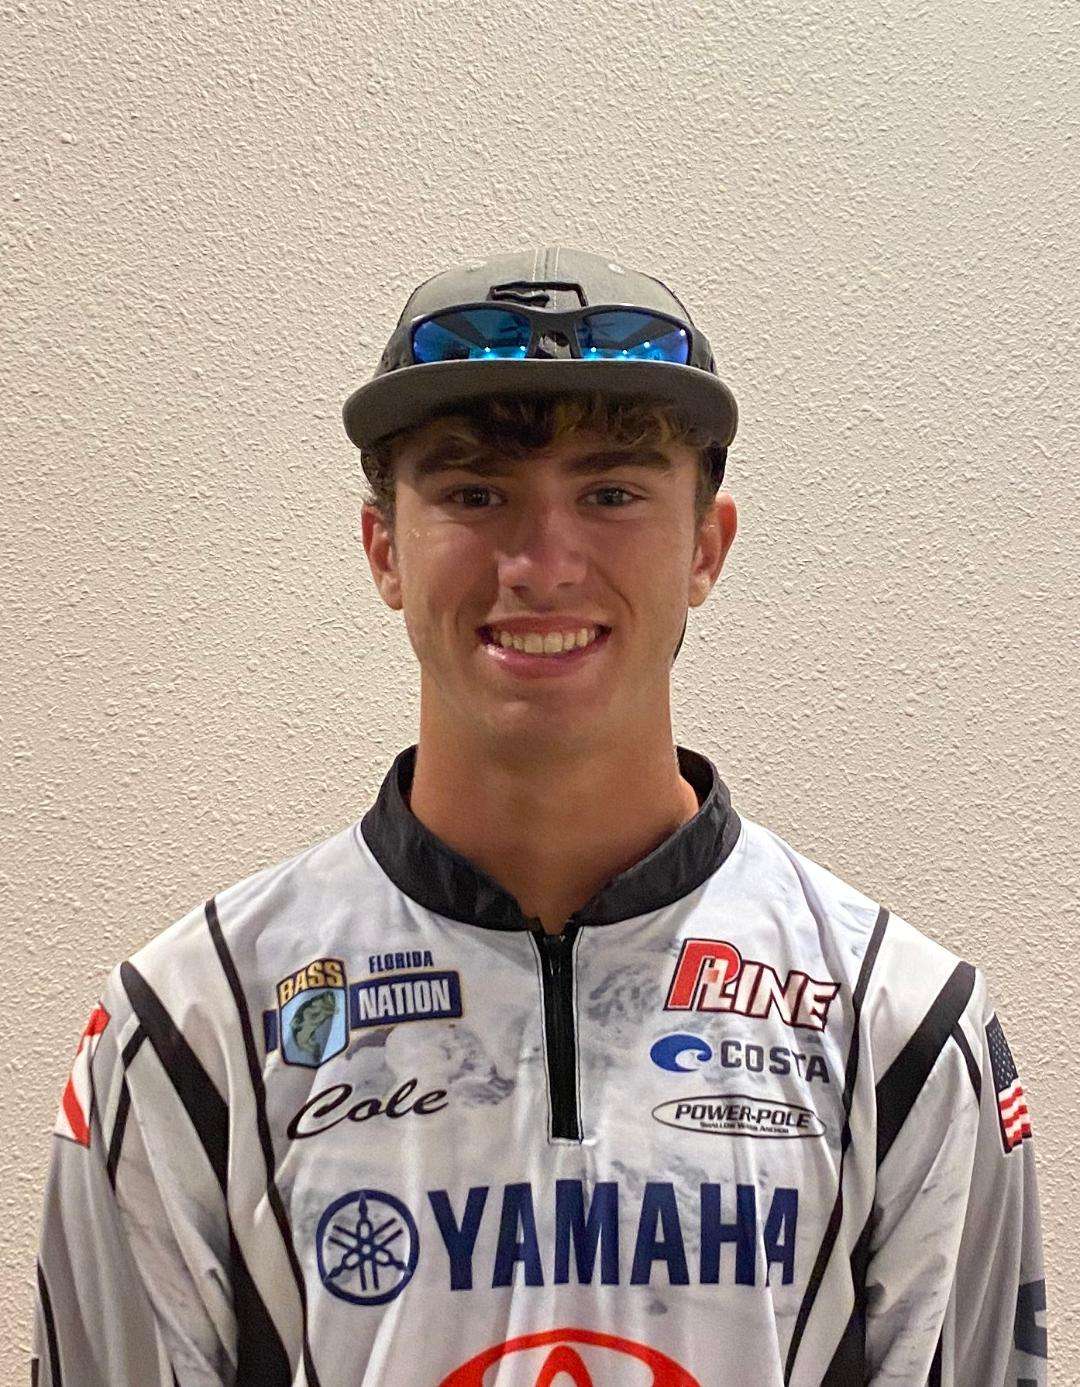 <p><strong>Cole Rountree, Clermont, Fla.</strong></p><p>Cole Rountree, a junior at South Lake High School, won two tournaments in the 2020 season, as well as netting ten Top 5 finishes and seven Top 20 finishes. He has placed 5th place or higher in every tournament he has participated in during the 2020 and 2021 tournament seasons. âCole excels academically and currently maintains a weighted grade point average of 4.65,â says Steven W. Benson II, South Lake High School principal. âI have been excited to hear about Coleâs exploits and successes as an angler, as well as his nonprofit work in the community, including the Buses and Backpacks program and Florida Scrub Jay Youth Camp.â Rountree is still fairly new to the fishing game, having only picked up fishing in the last three years. In his first year, he earned 5th place in Angler of the Year for the Lake County Teen Sportfishing Association. By his second year, he won Angler of the Year, and he currently holds that same position. His fishing goals include qualifying for state in the B.A.S.S. Nation High School Series, qualifying for the Bassmaster High School National Championship, fishing on the collegiate level and eventually pursuing his dream of competing on the national level.</p>